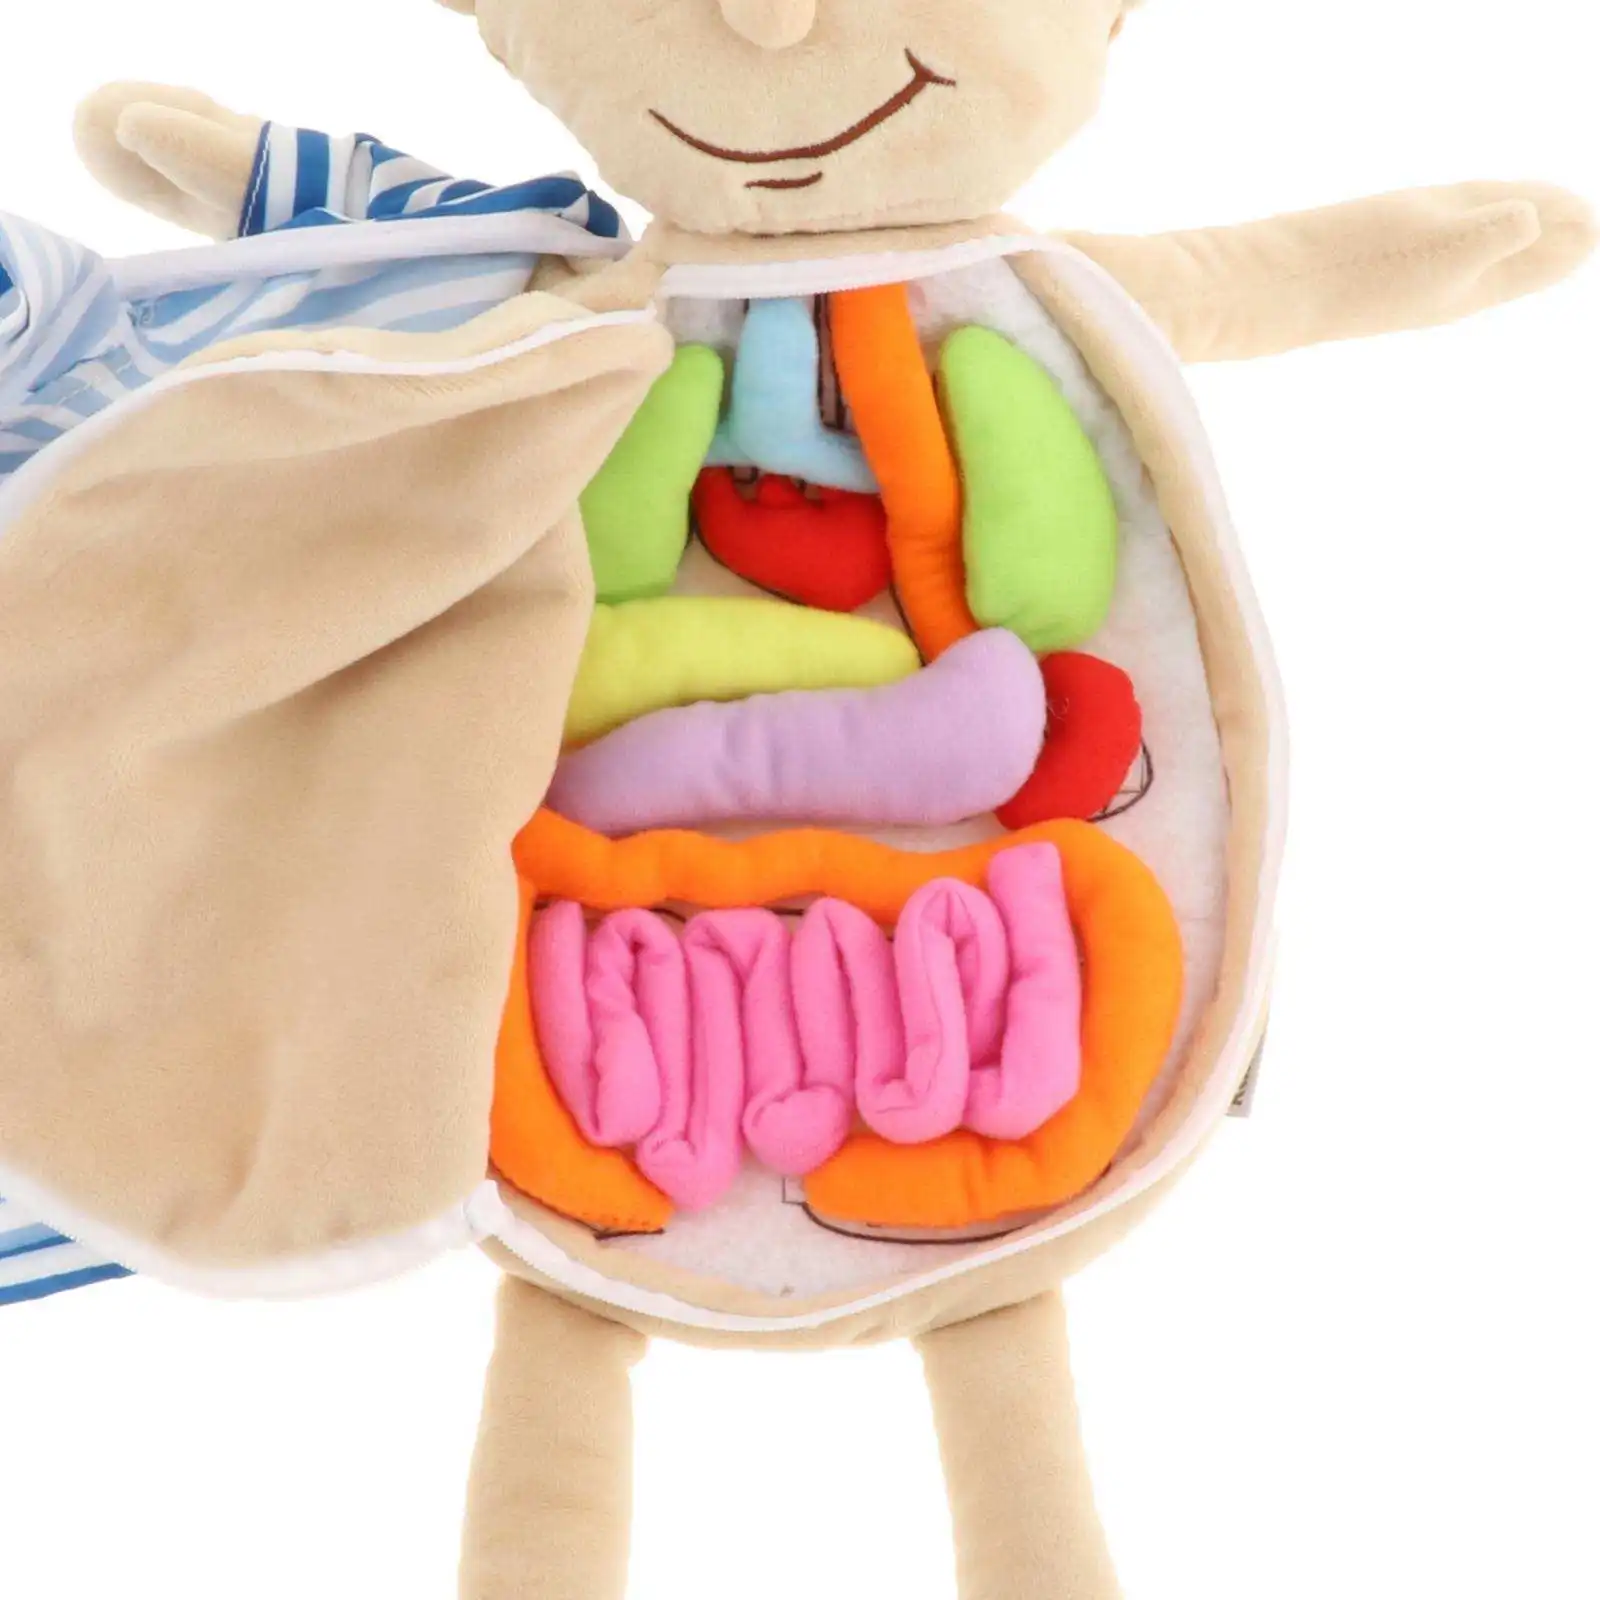 Human Body Anatomy Toy, 3D Puzzle Removable Organ Toy Early Education Toys for Children